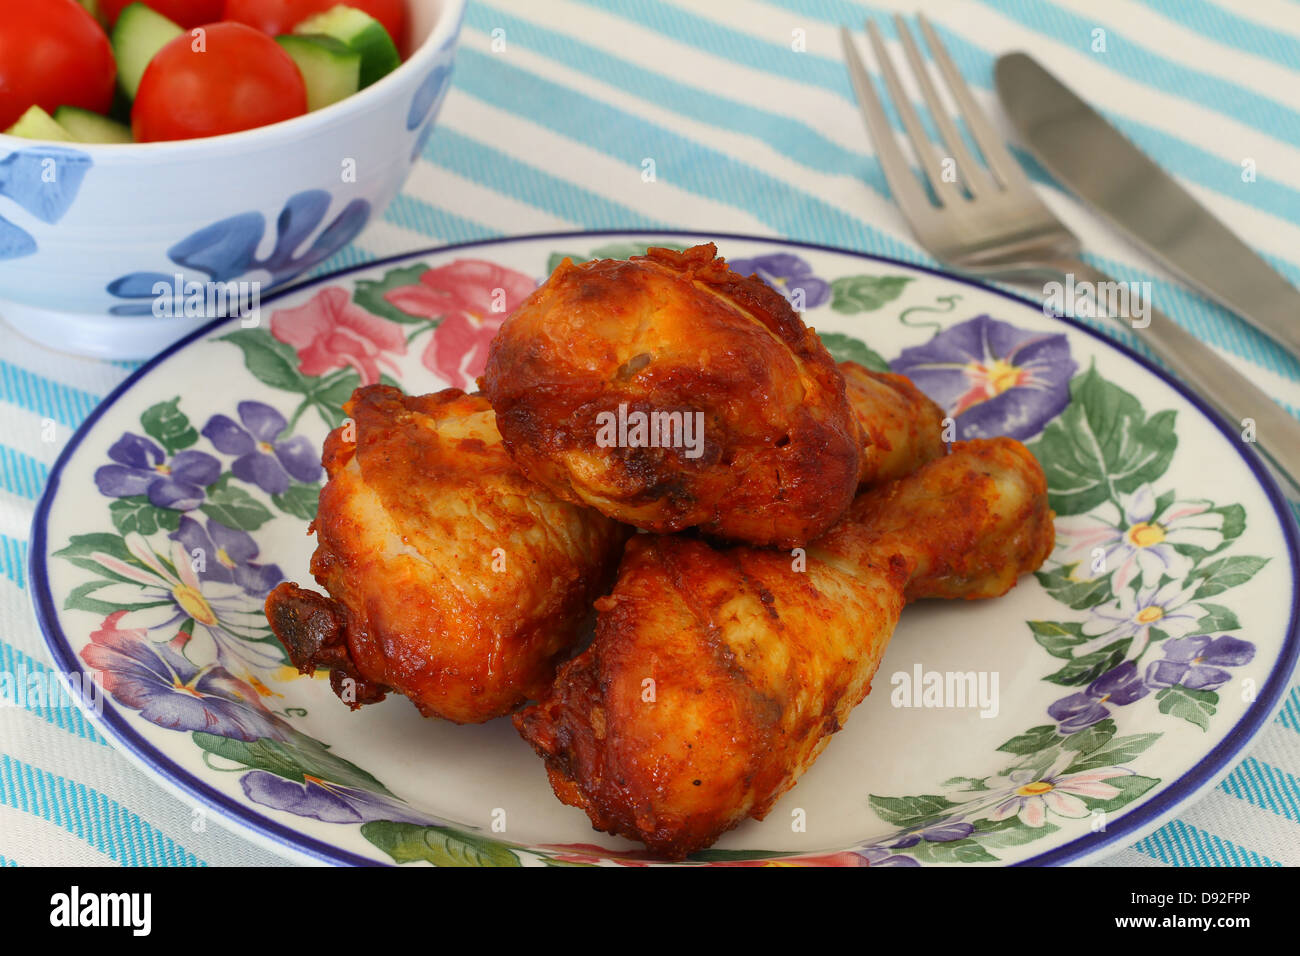 Roasted chicken drumsticks on vintage plate Stock Photo